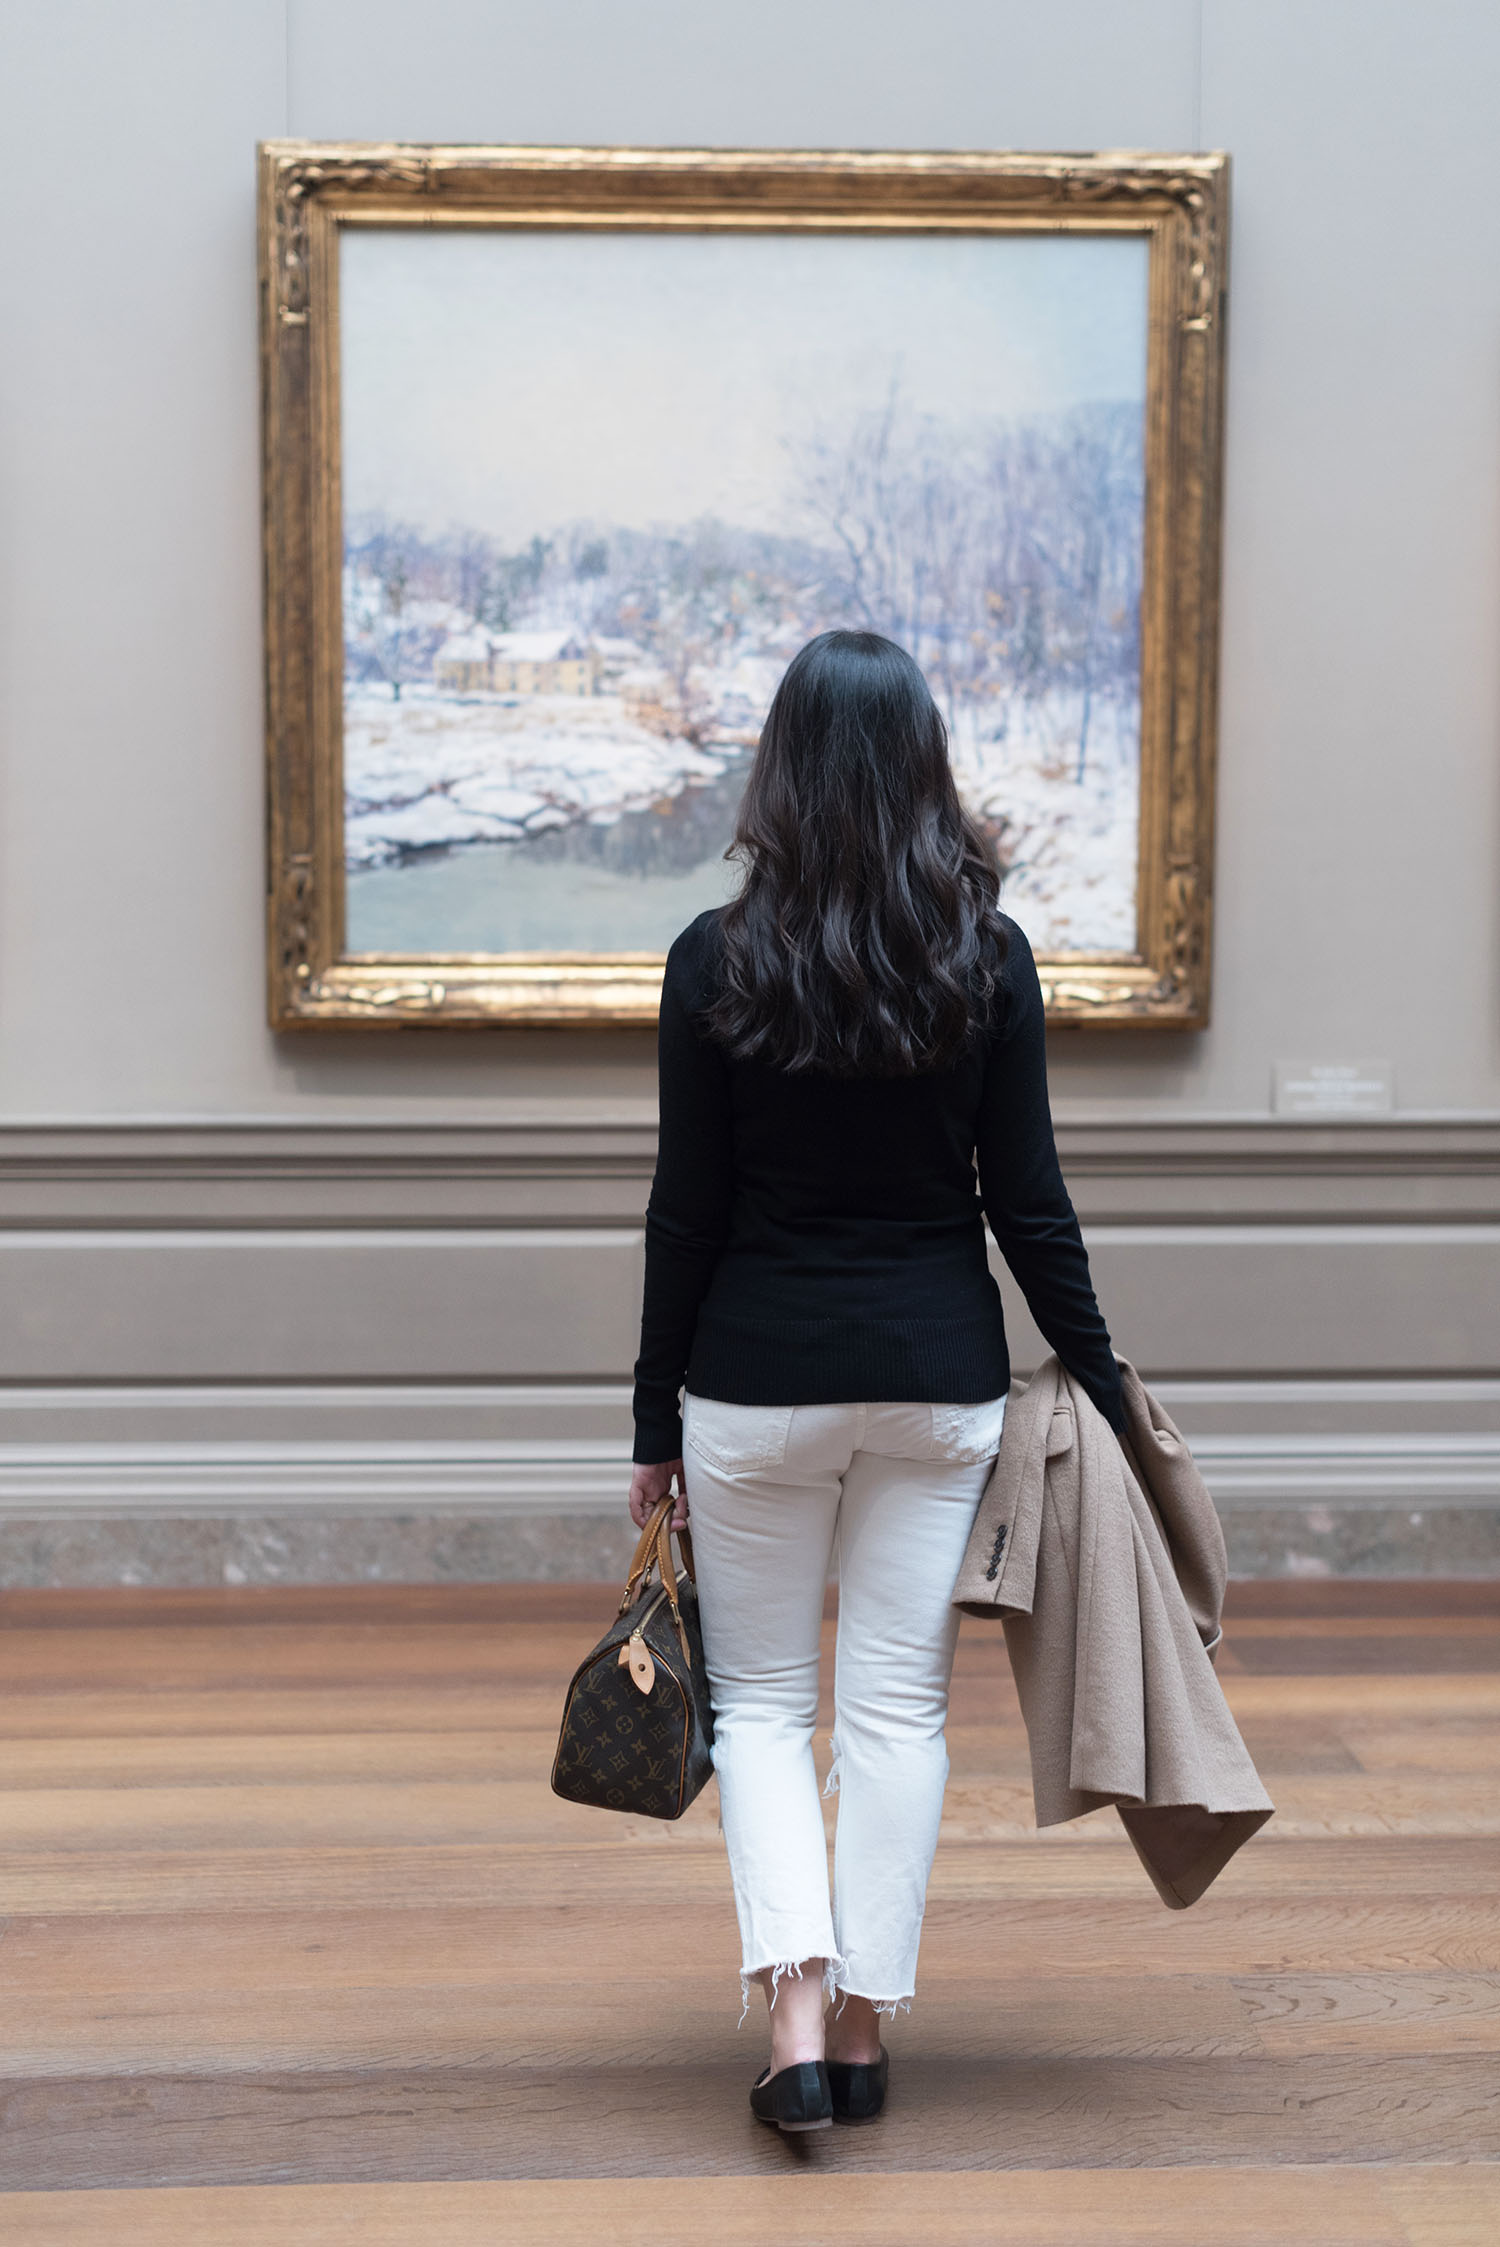 Winnipeg fashion blogger Cee Fardoe of Coco & Vera fashions an oil painting at the National Gallery of Art in Washington DC, wearing Grlfnd white jeans and carrying a Louis Vuitton Speedy 25 handbag